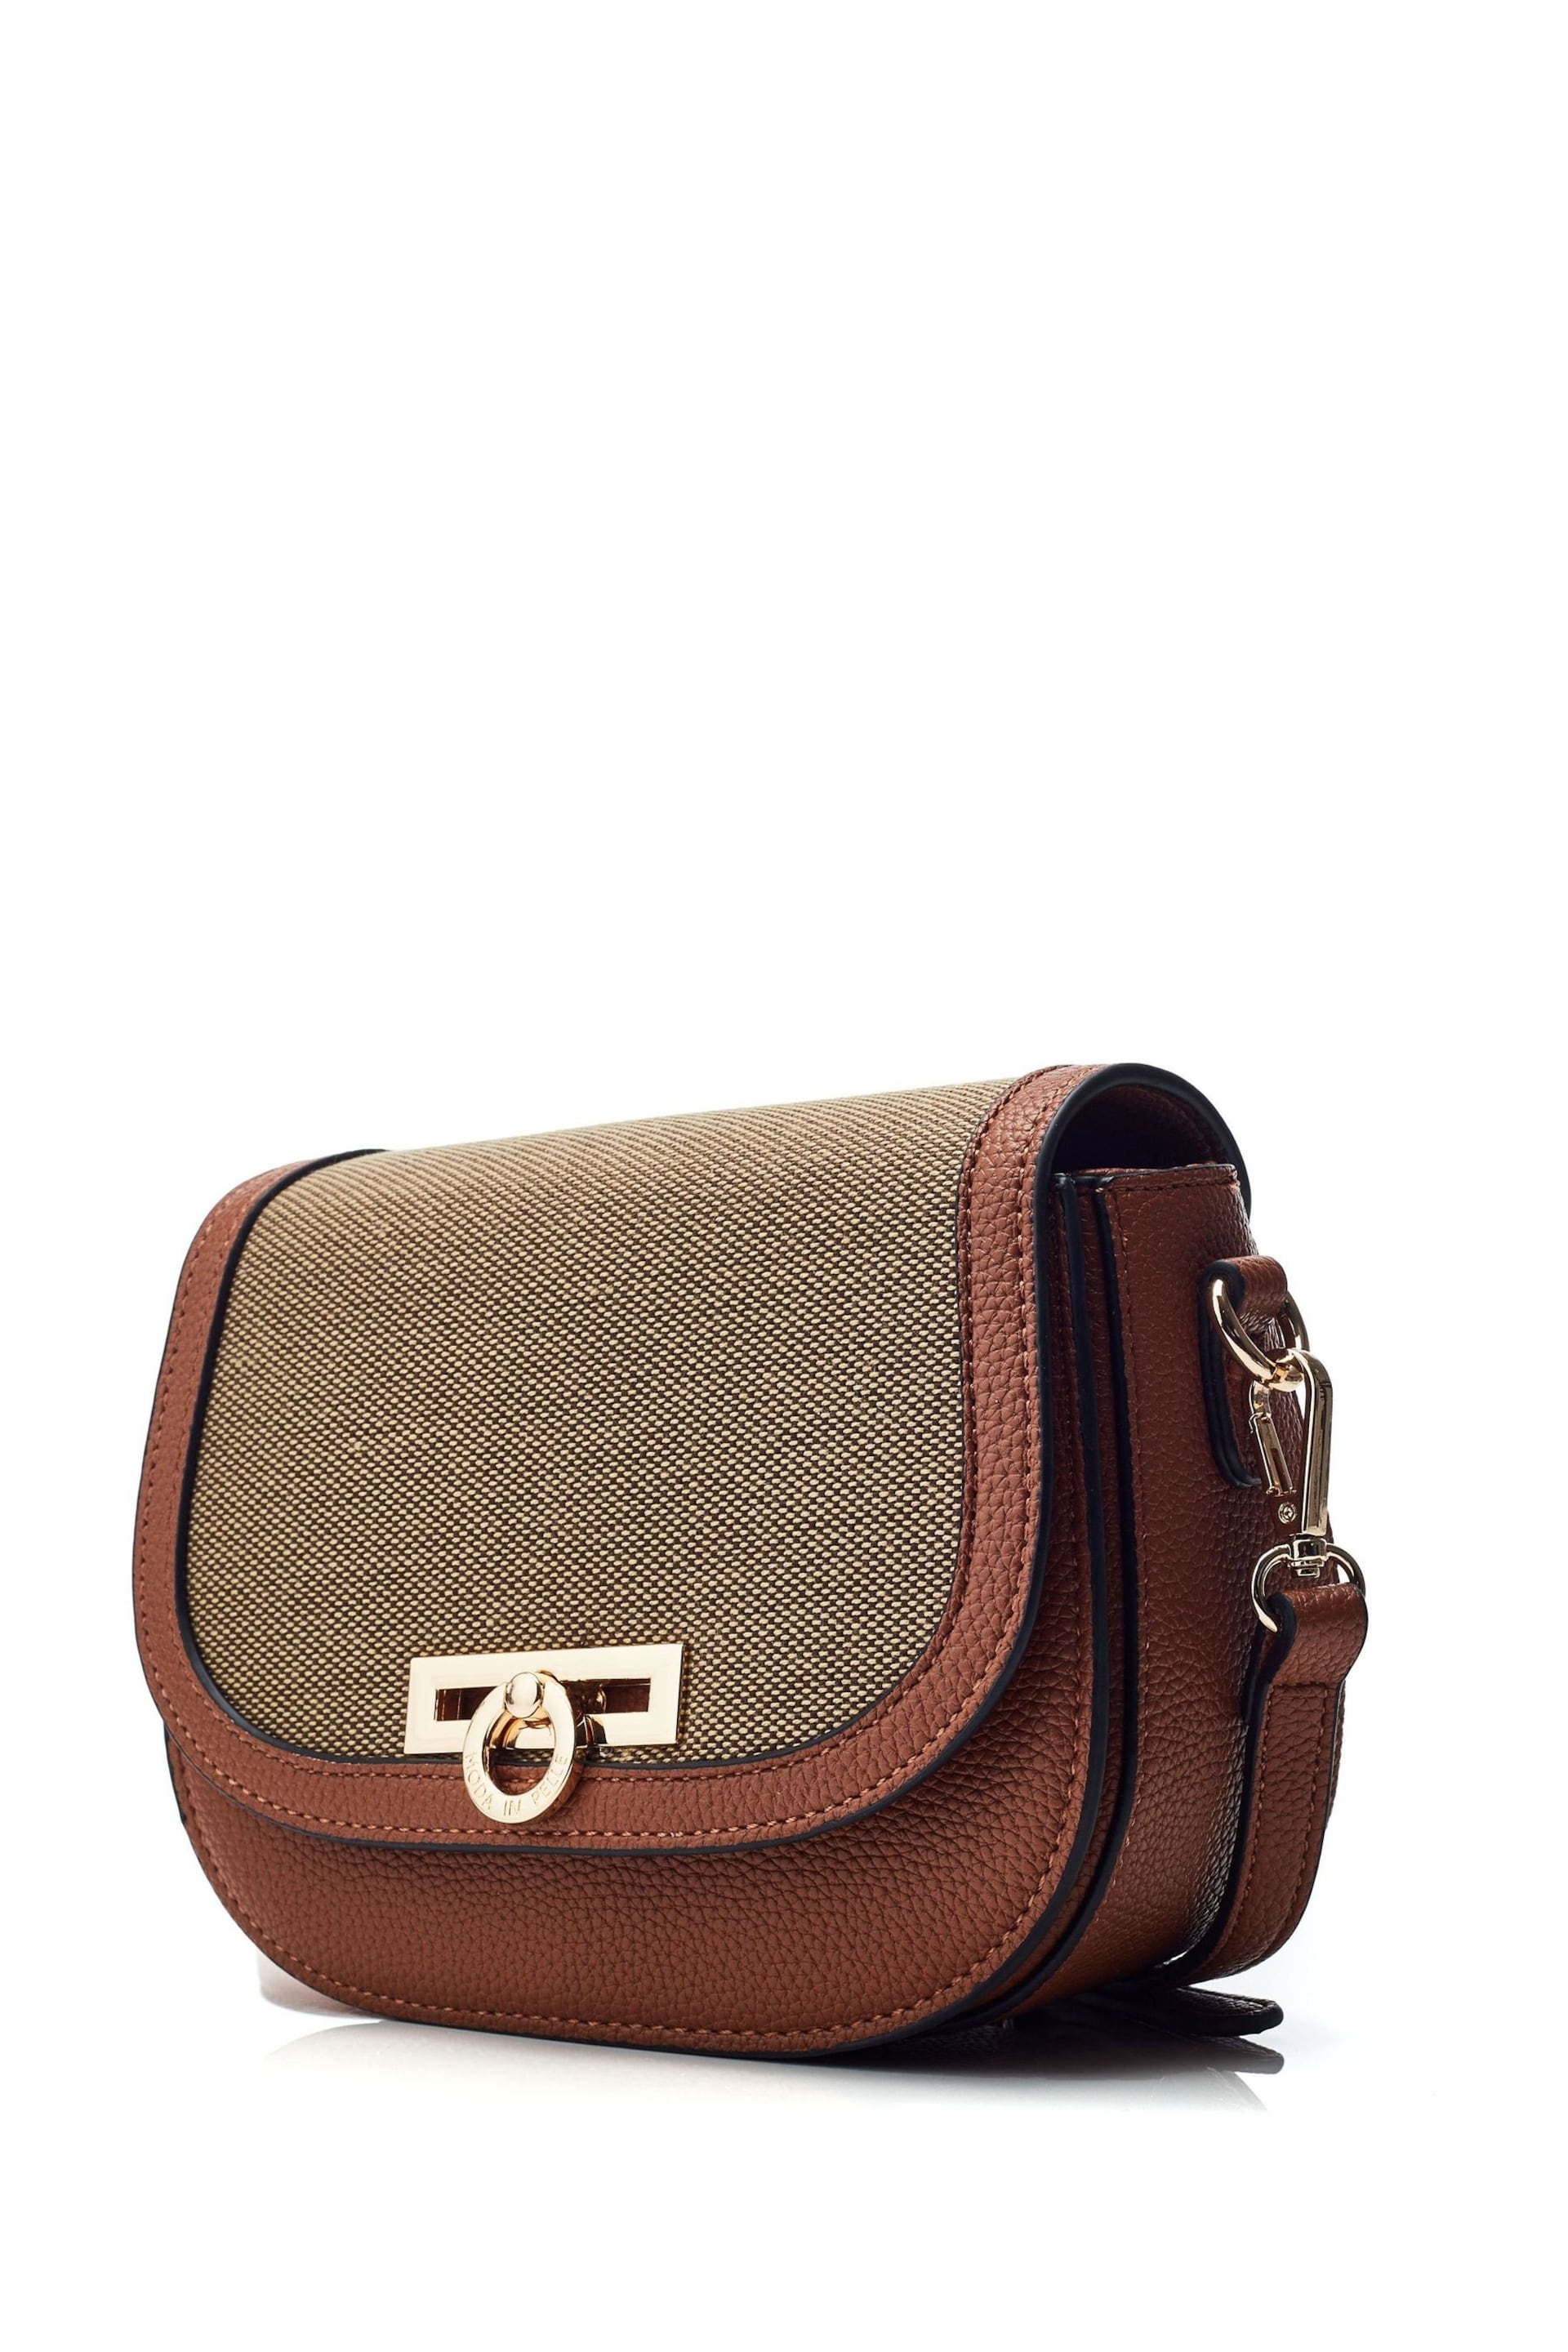 Moda in Pelle Summer Cross-Body Bag With Feature Strap - Image 2 of 4